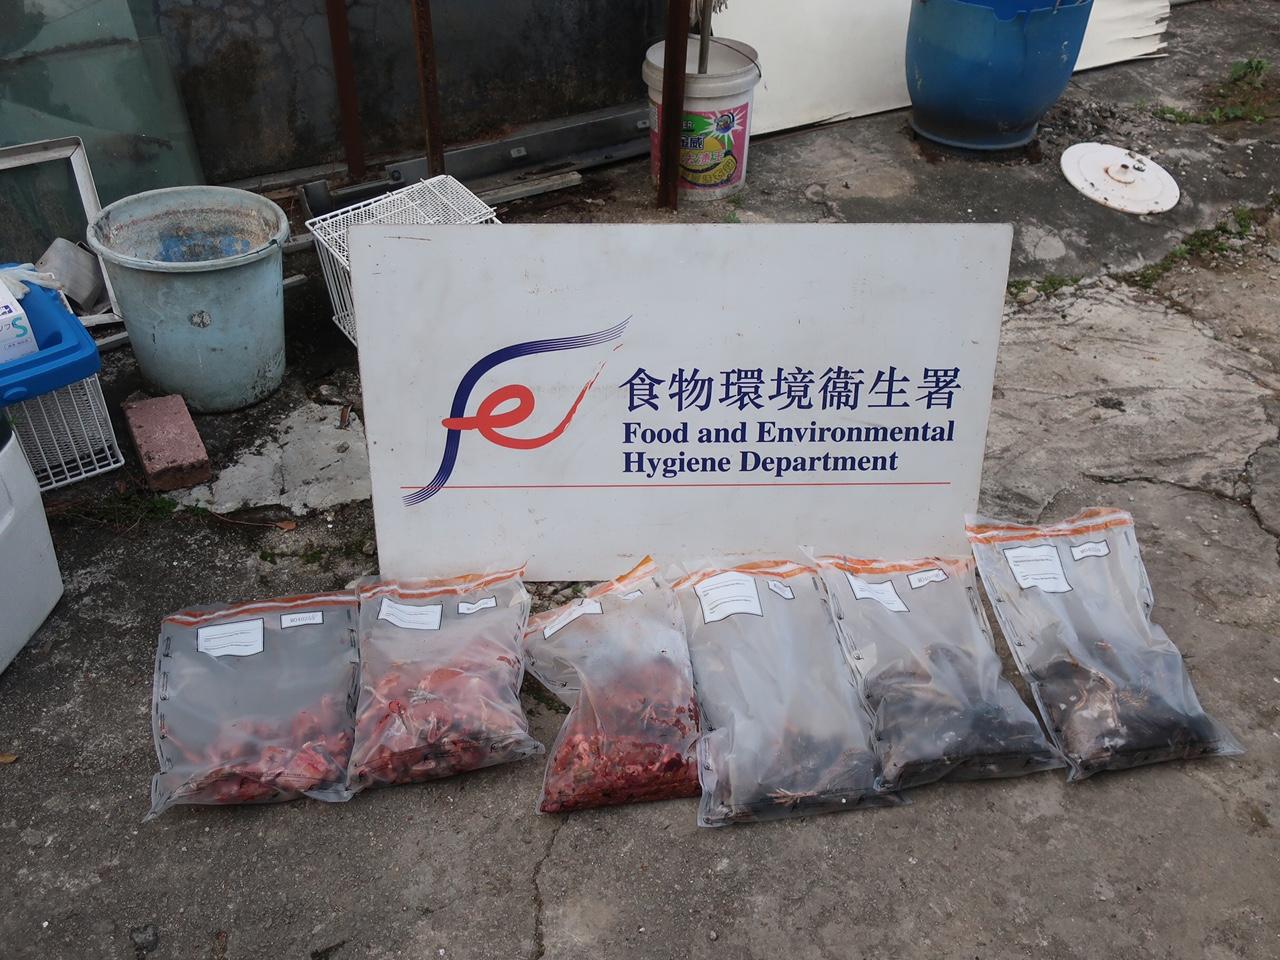 The Food and Environmental Hygiene Department, jointly with the Agriculture, Fisheries and Conservation Department, raided an unlicensed food factory in Tin Sam Tsuen, Yuen Long, this morning (February 6). Photo shows the quails and dressed quails seized during the operation.
